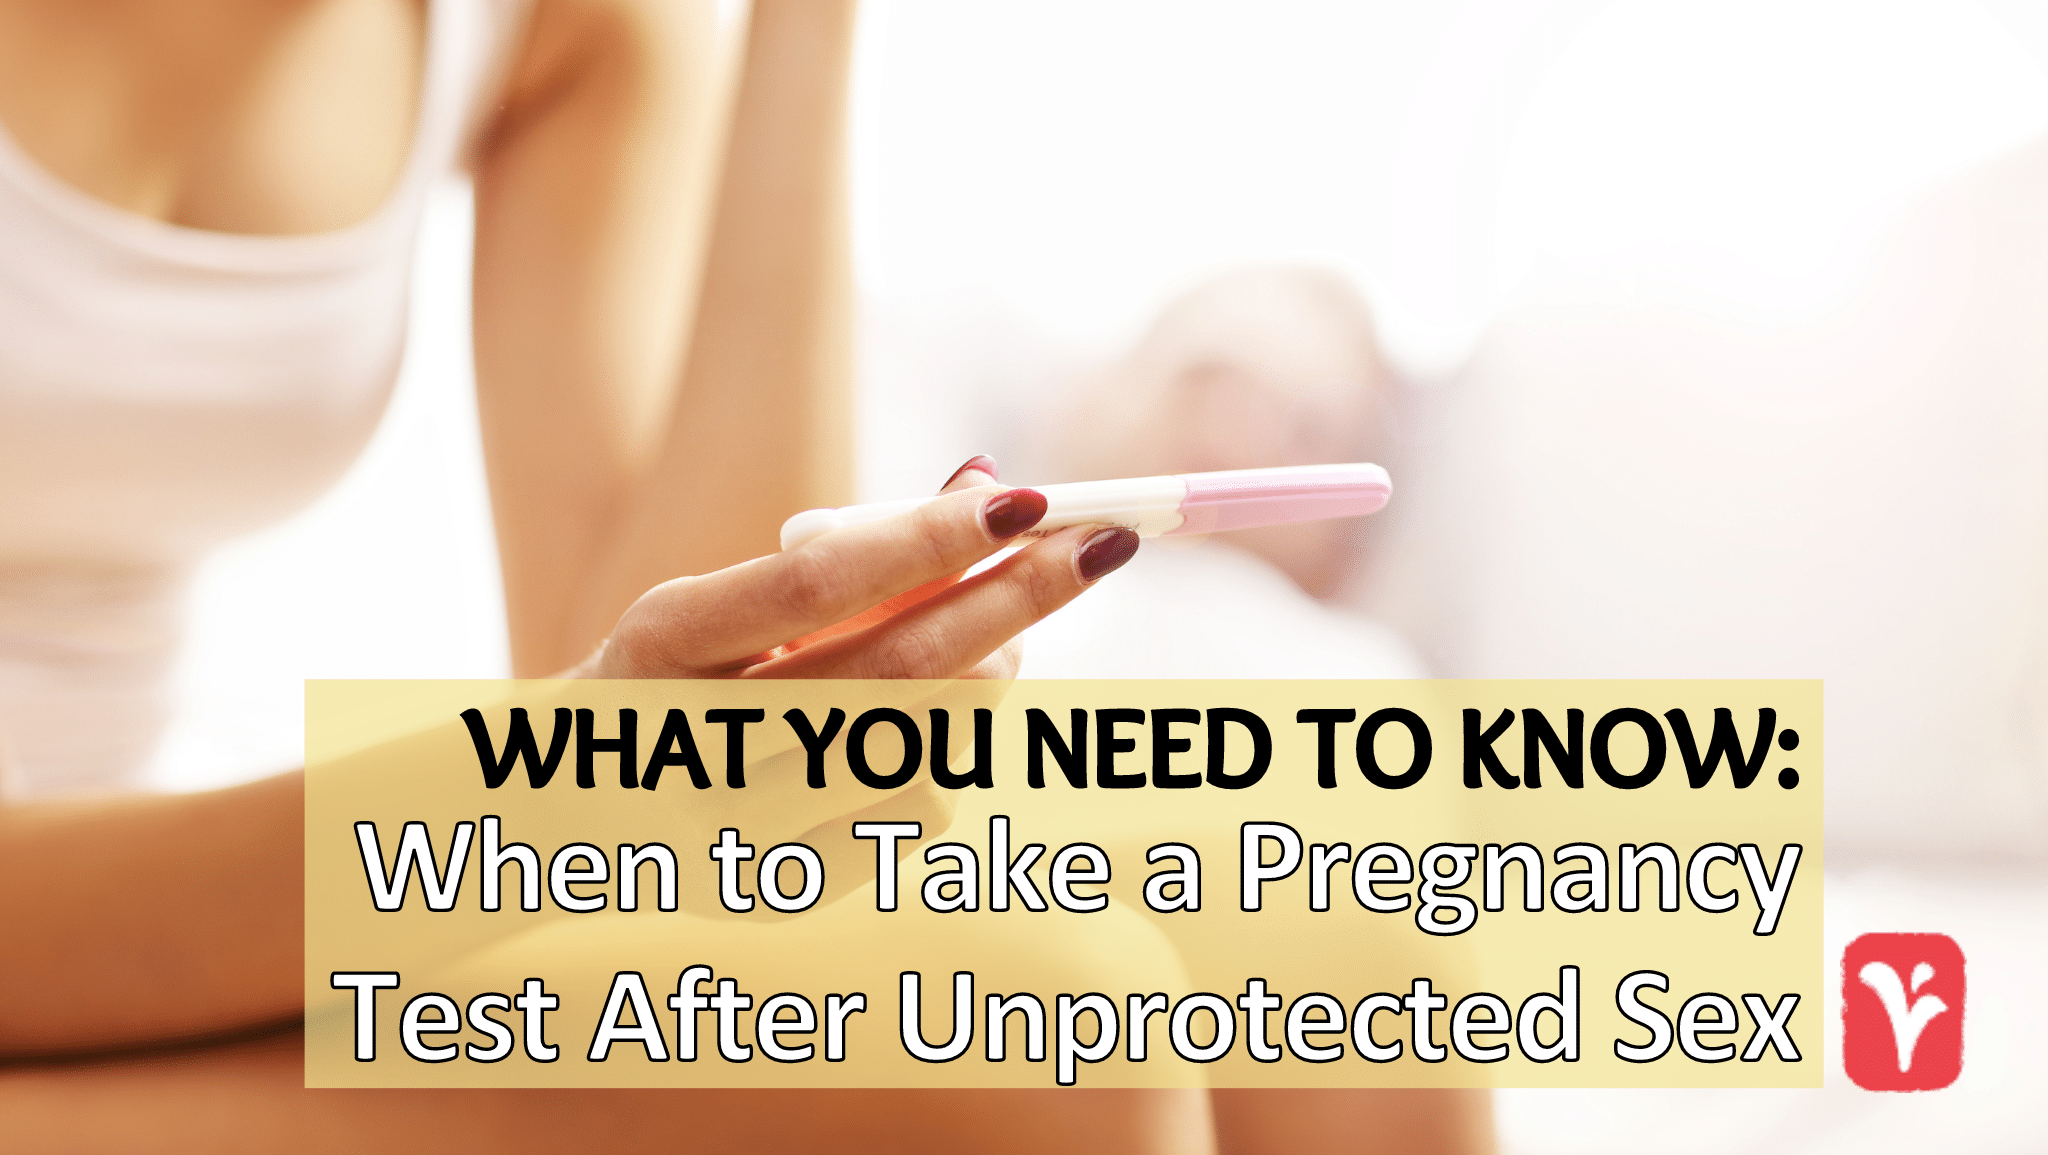 When to Take a Pregnancy Test After Unprotected Sex